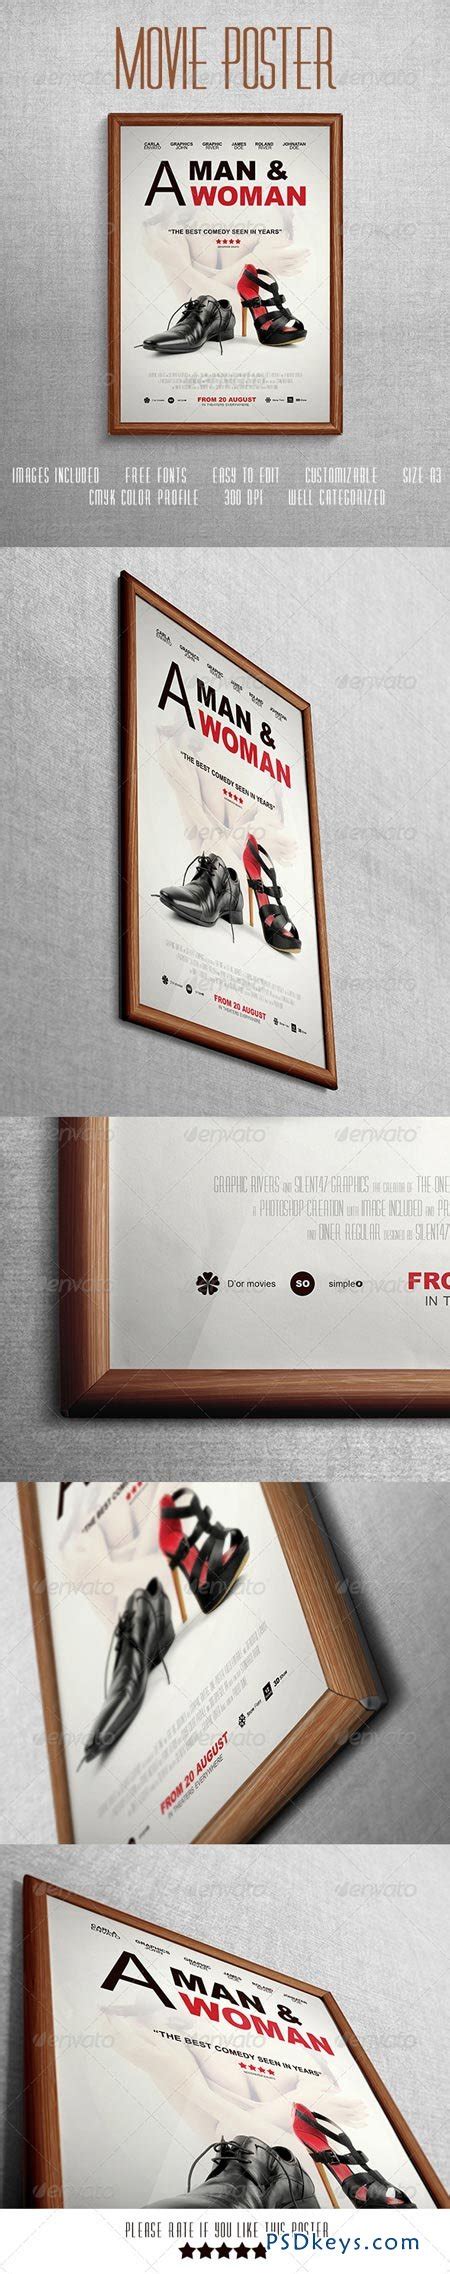 Comedy Movie Poster Template 7353041 » Free Download Photoshop Vector Stock image Via Torrent ...